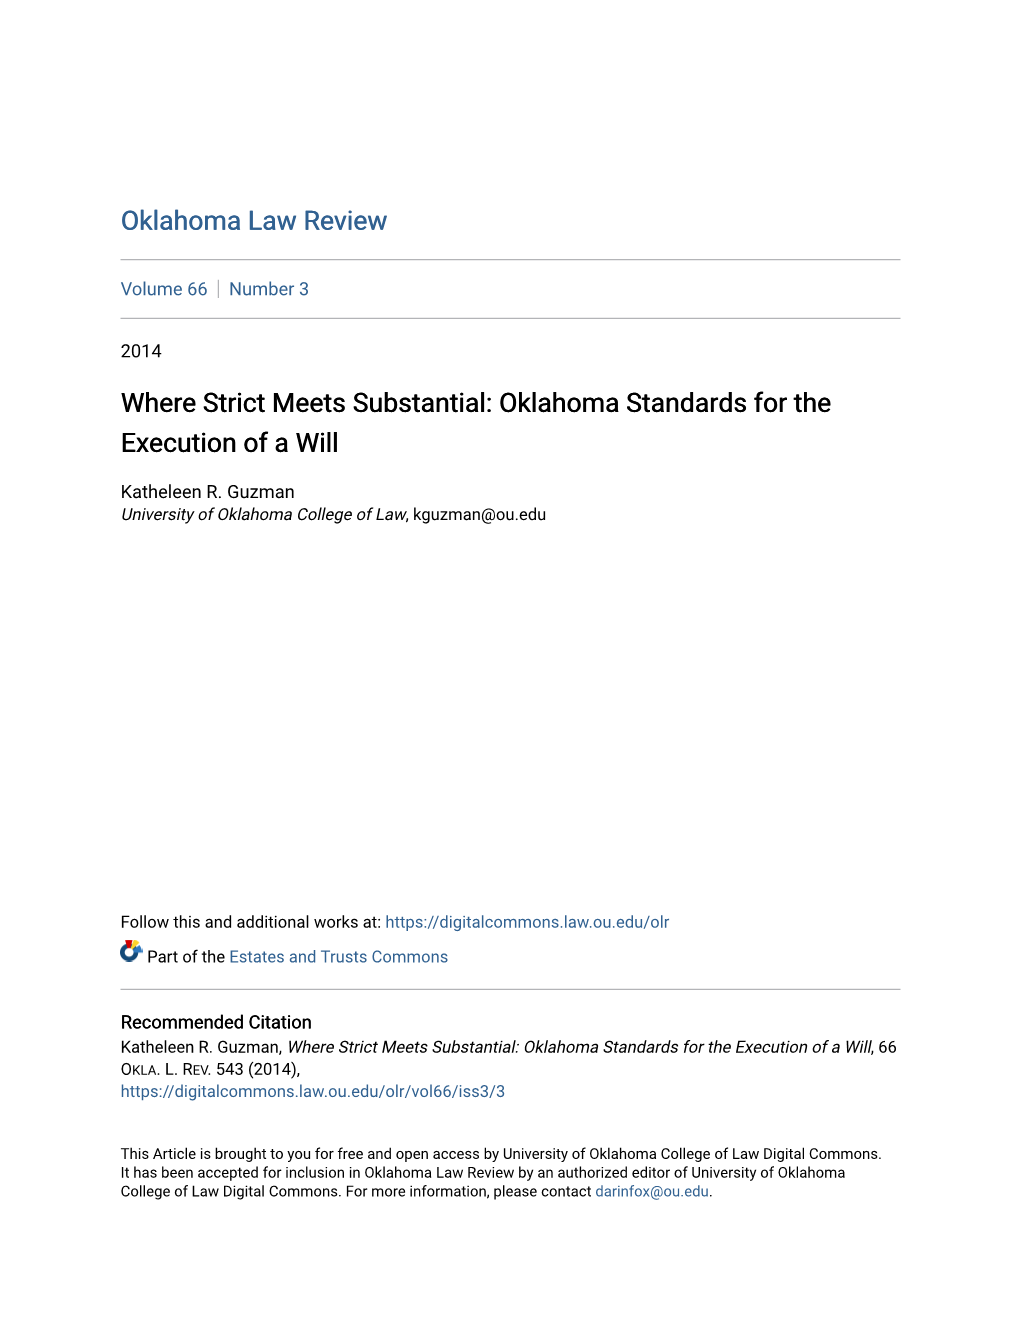 Oklahoma Standards for the Execution of a Will